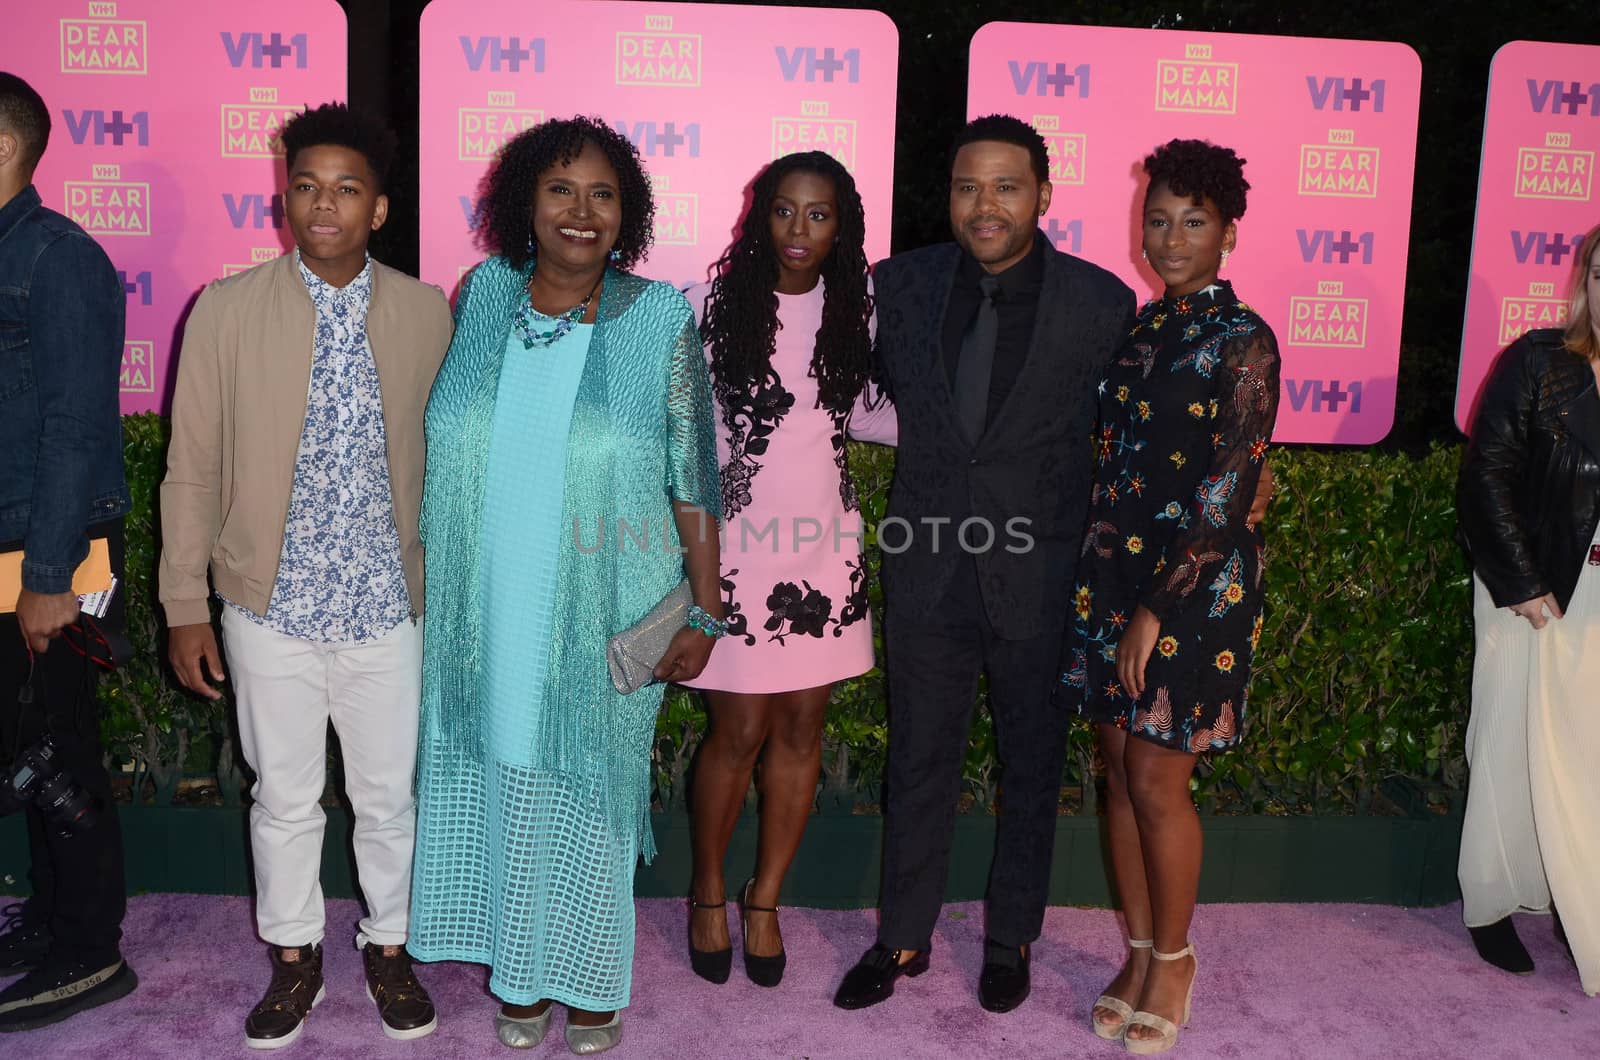 VH1`s 2nd Annual Dear Mama: An Event To Honor Moms by ImageCollect